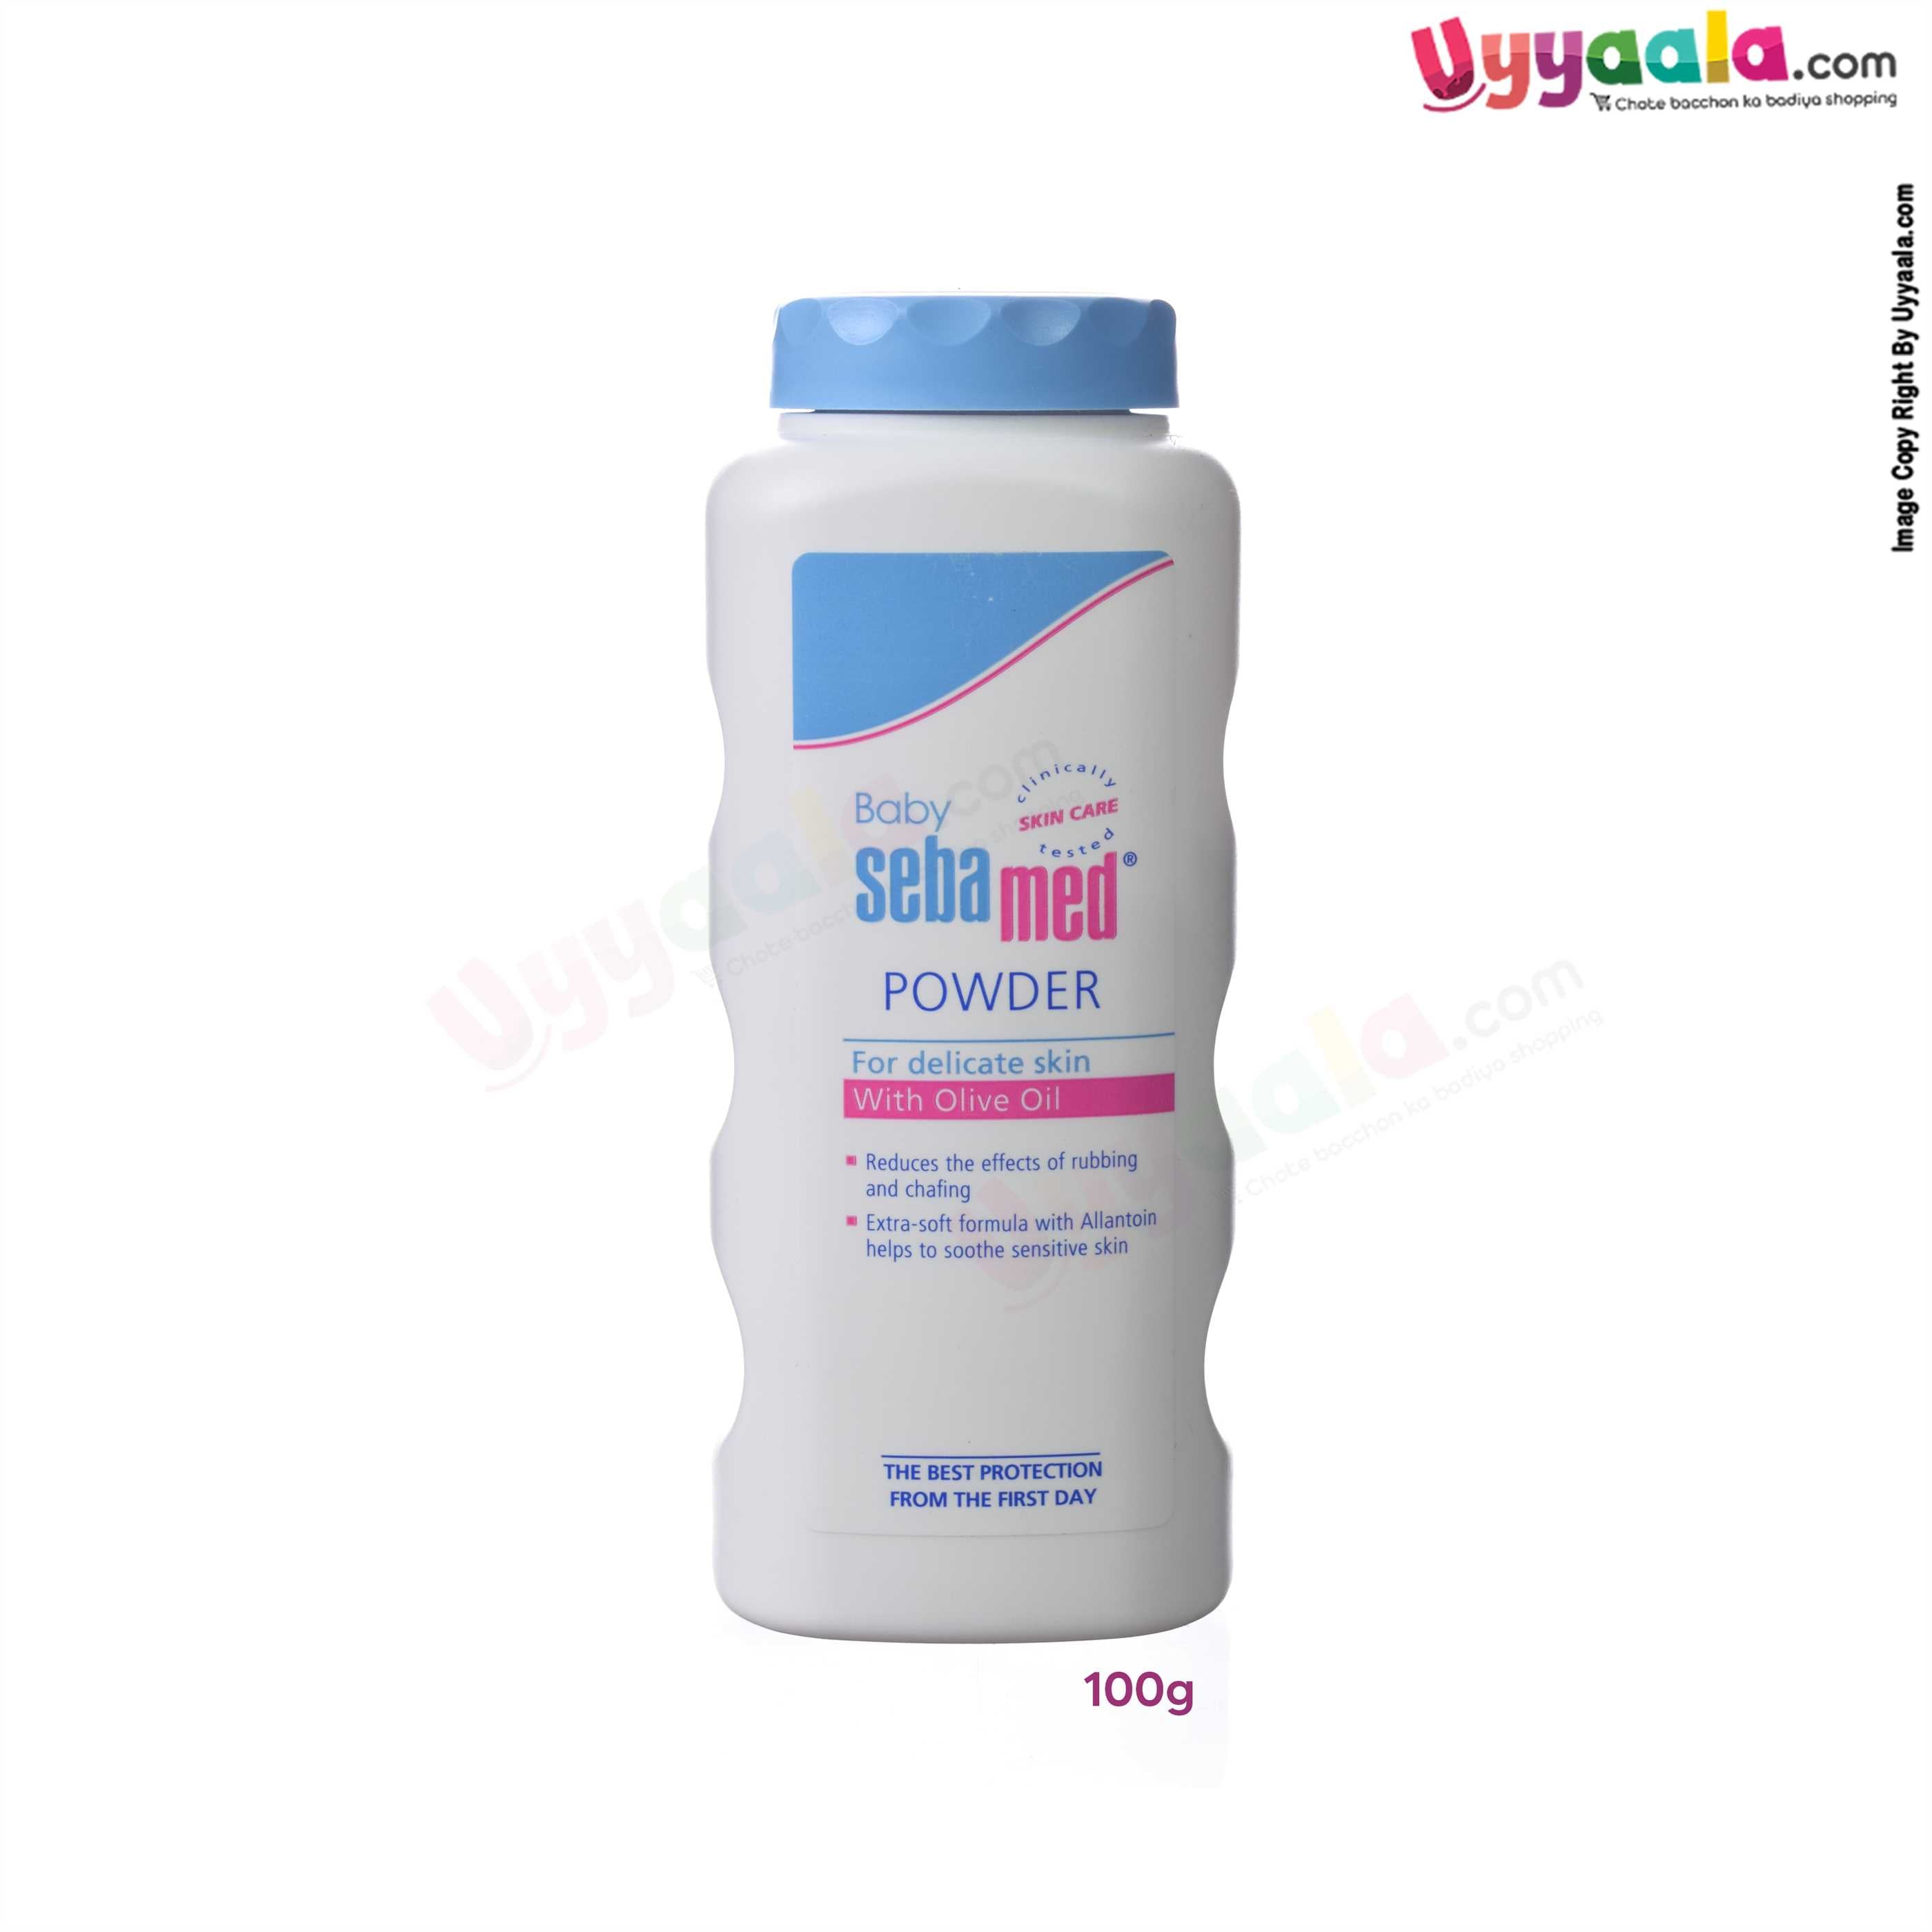 SEBAMED Baby powder for delicate skin with olive oil - 100g